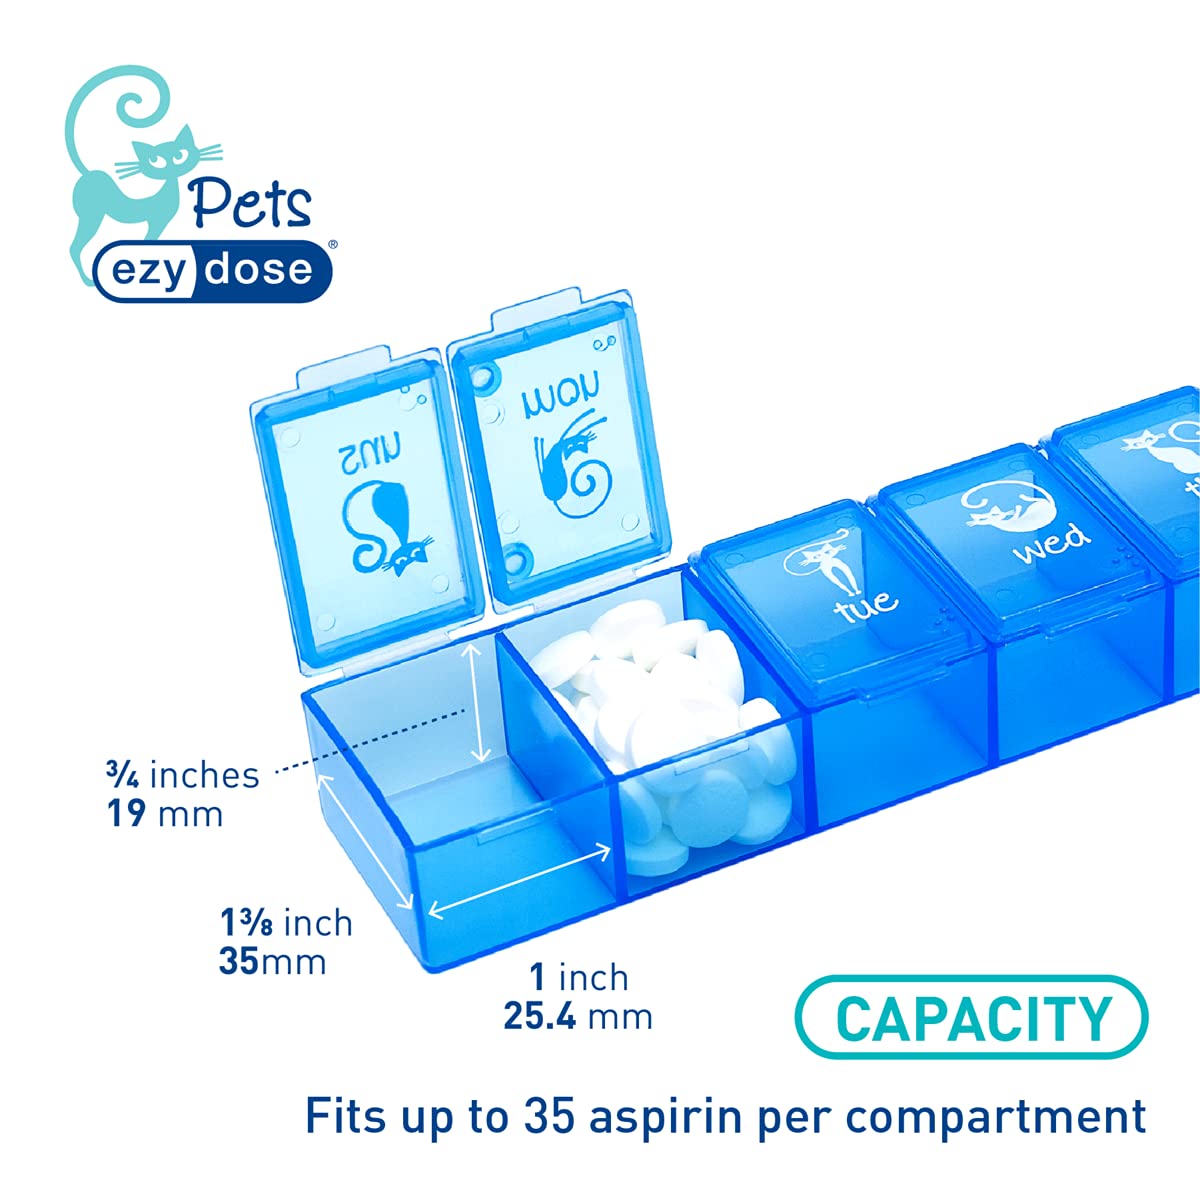 EZY DOSE Pets Weekly (7-Day) Pill Organizer, Vitamin and Medicine Box for Dogs, X-Large Compartments, Blue Lids